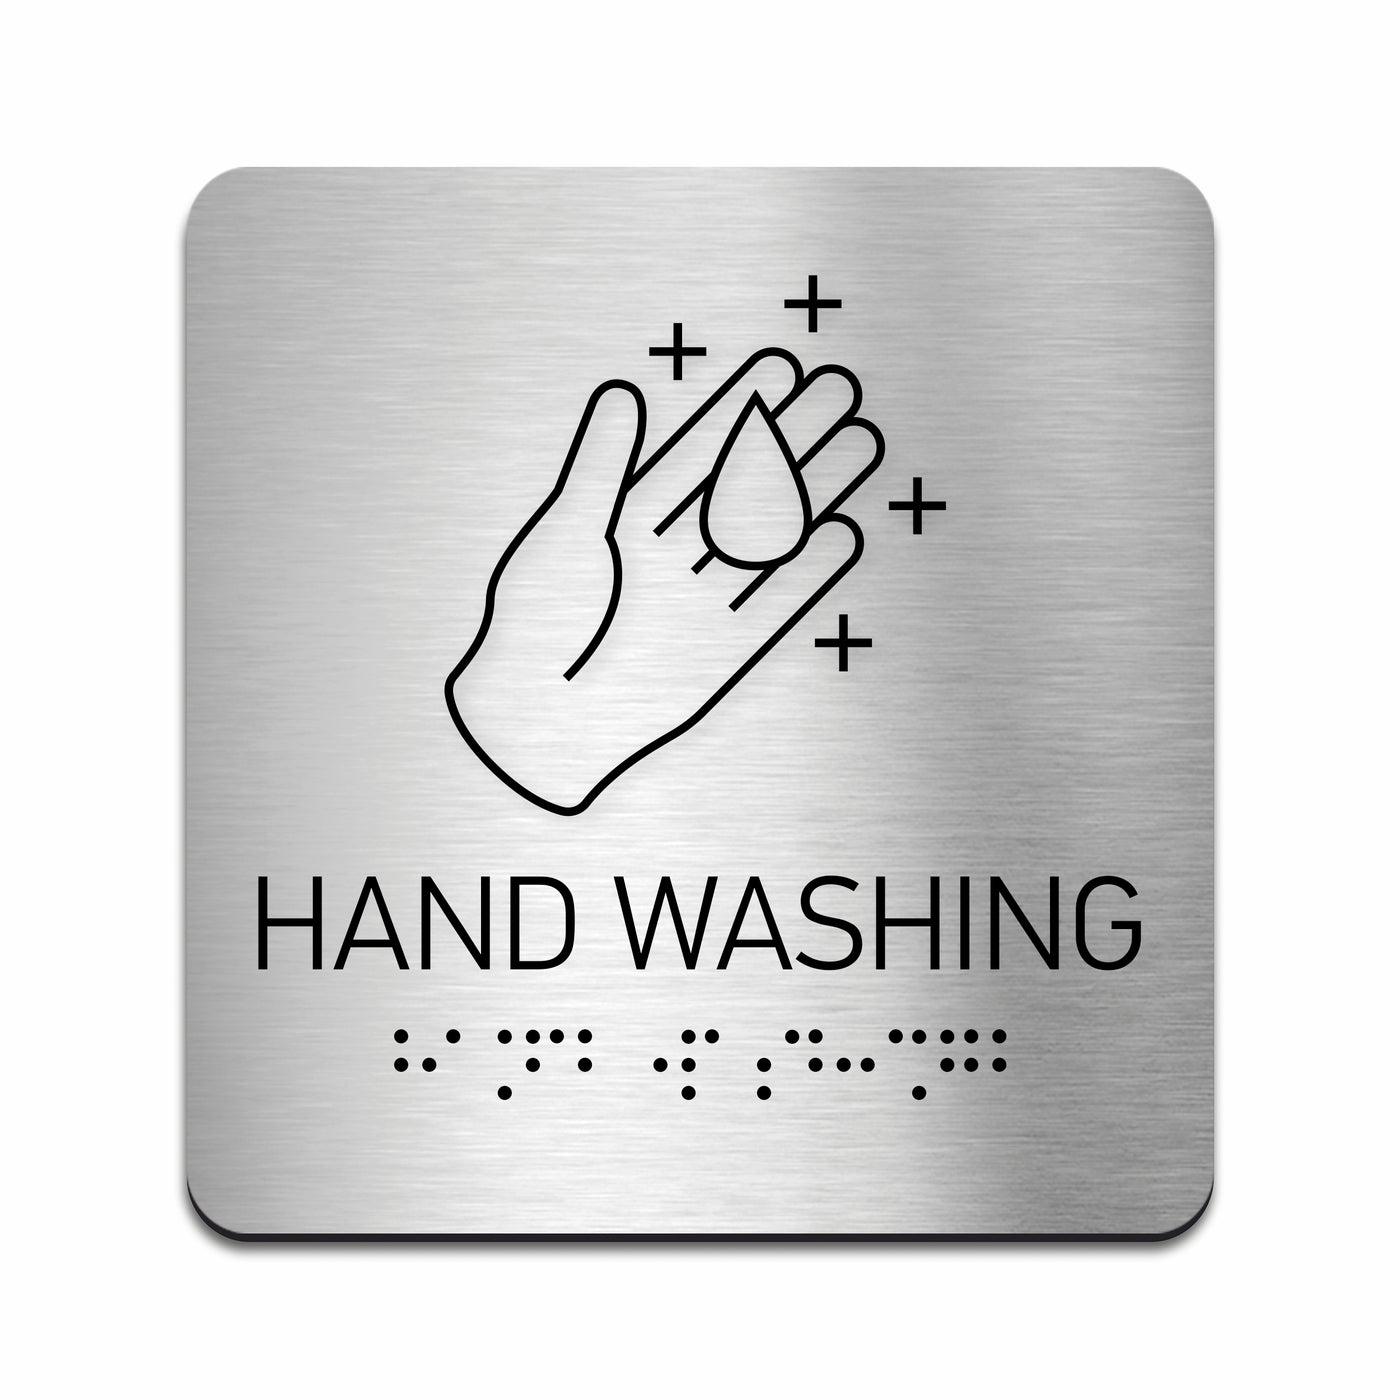 Information Signs - Hand Washing Sign - Steel Sign